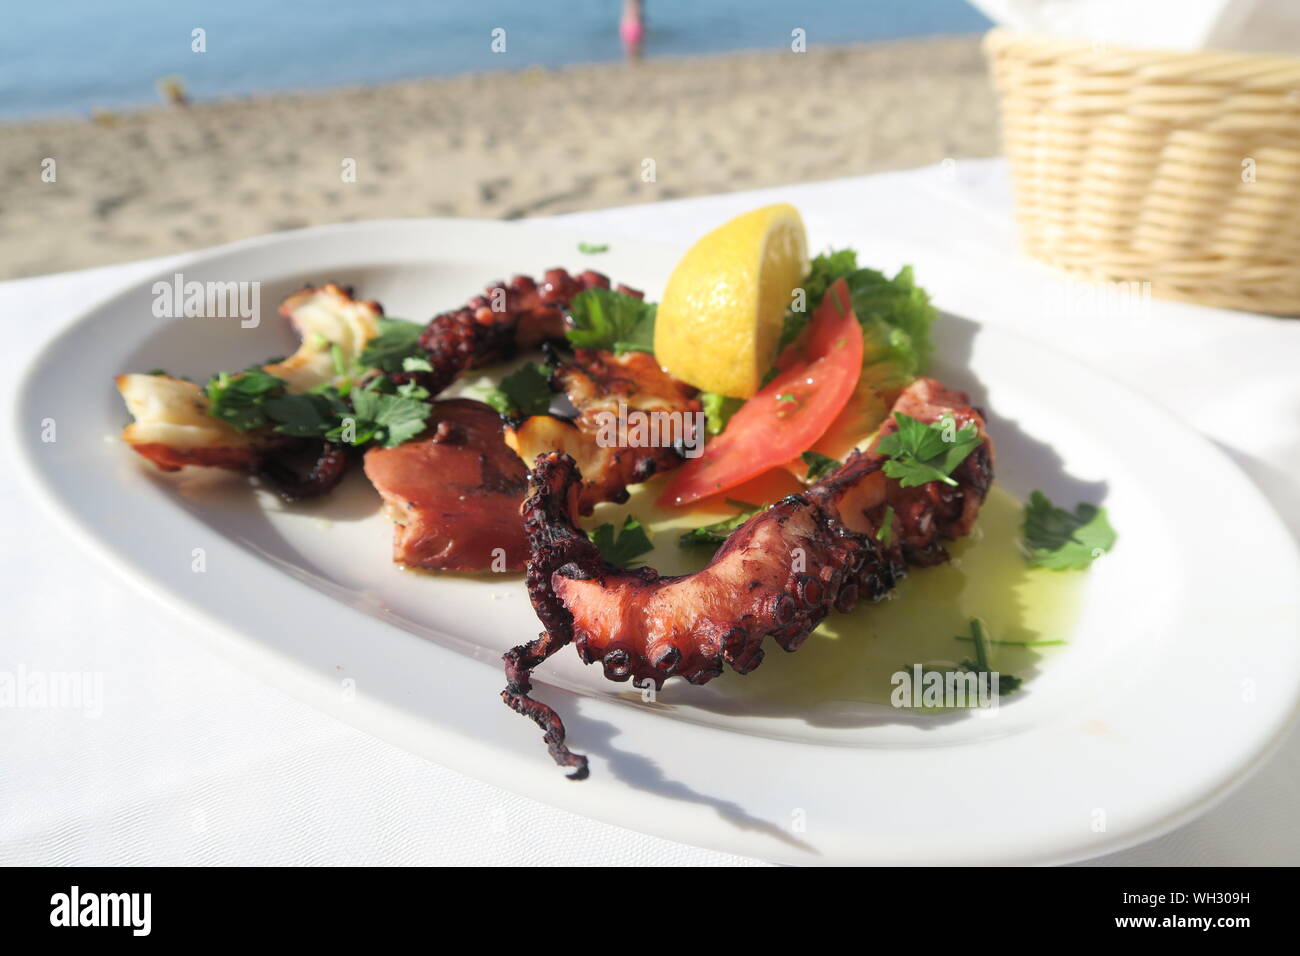 Grilled Octopus And Lemon In Plate On Table At Beach Stock Photo